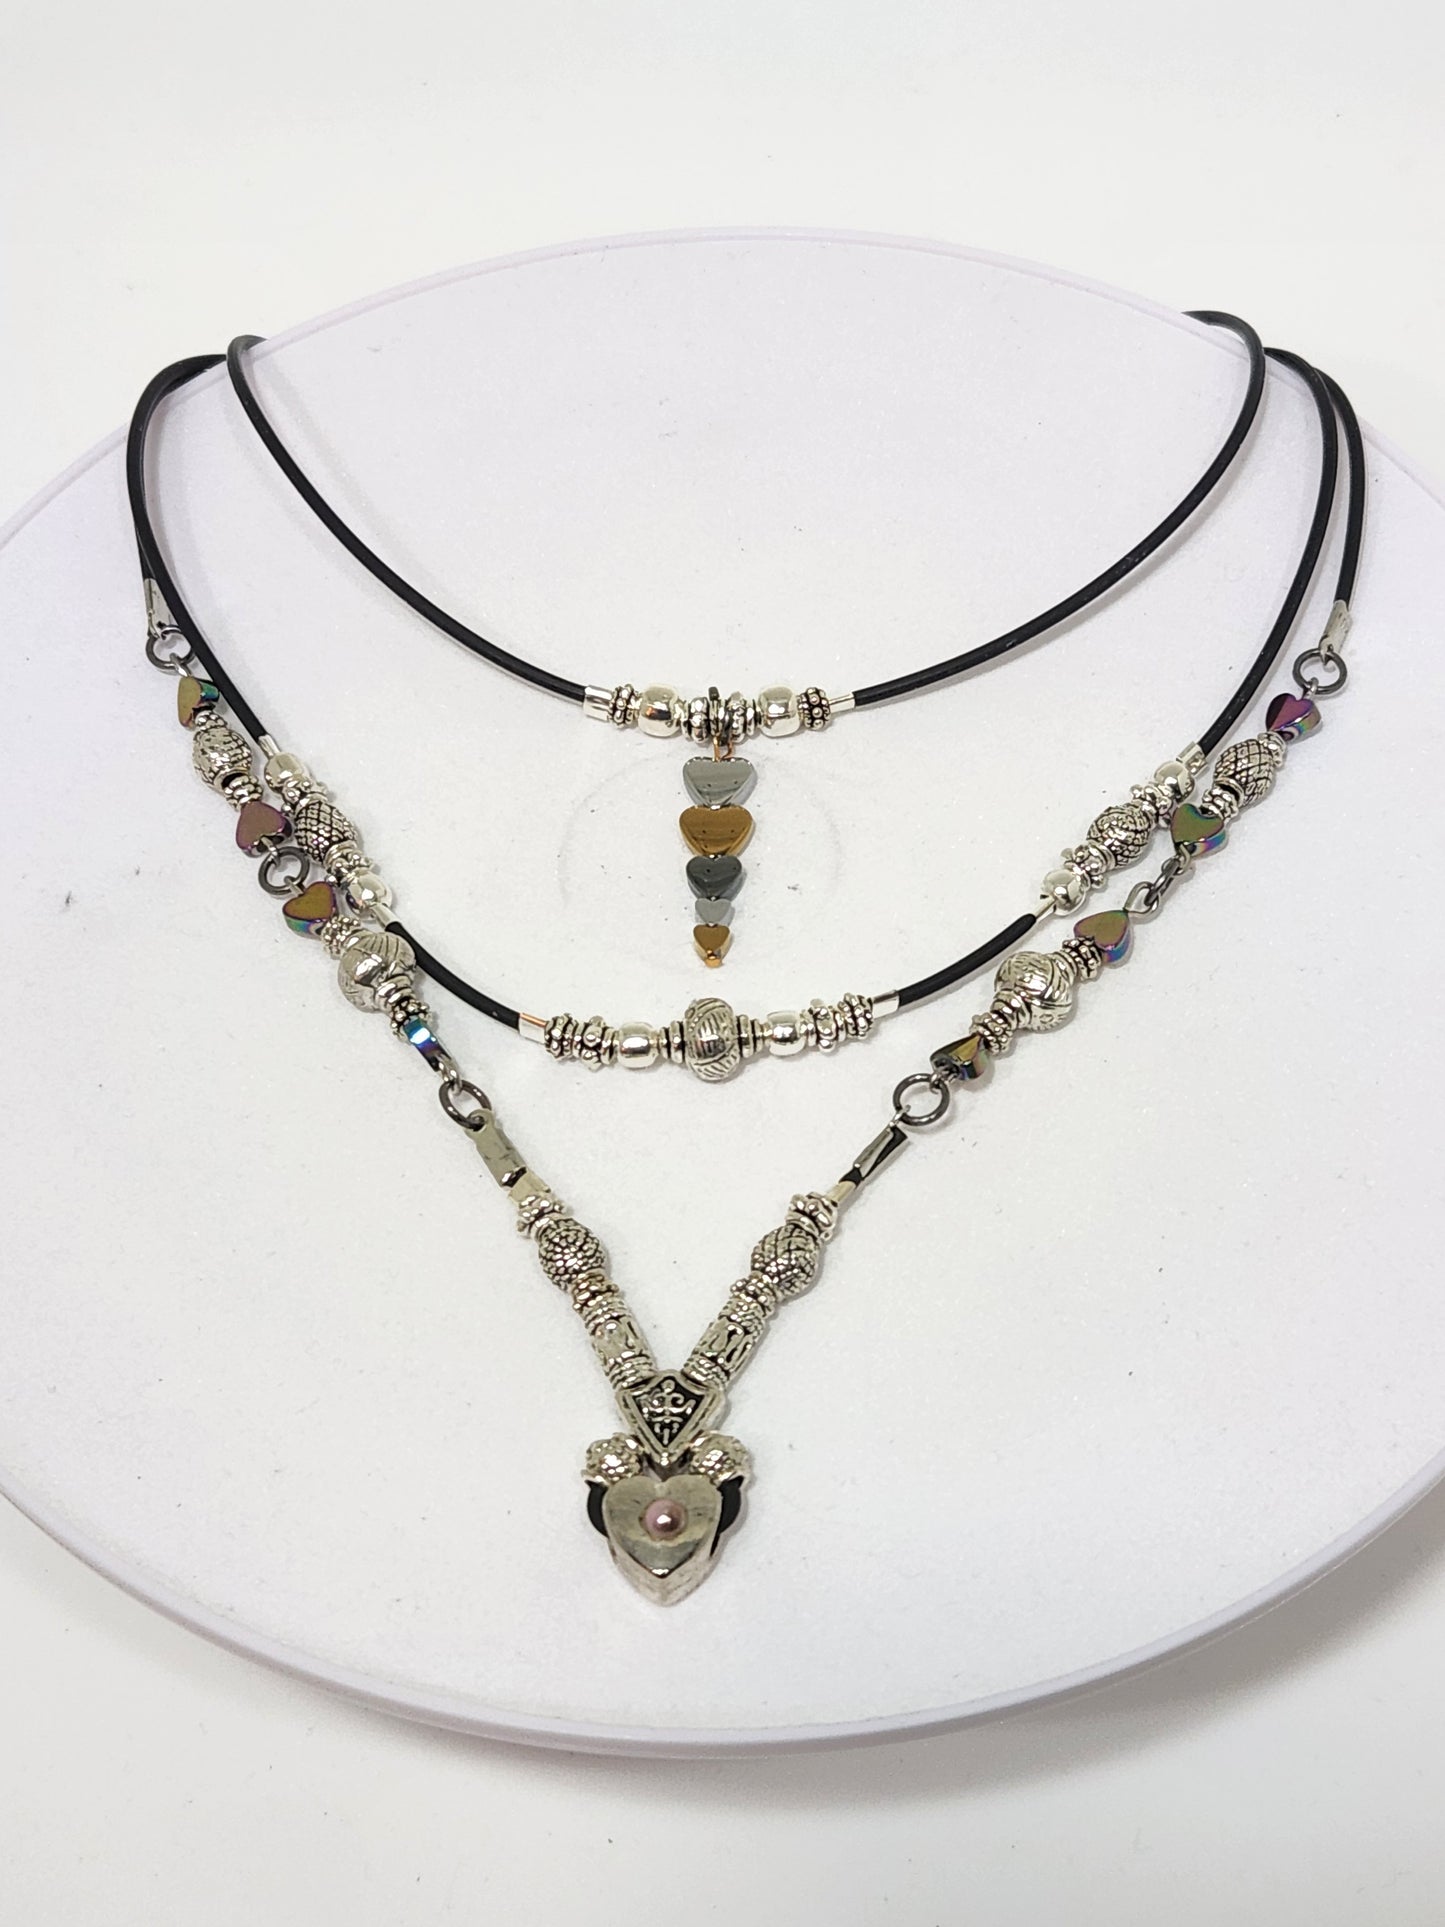 DOUBLE NECKLACE WITH ANTIQUE SILVER HEART AND STERLING SILVER BEADS CHOKER